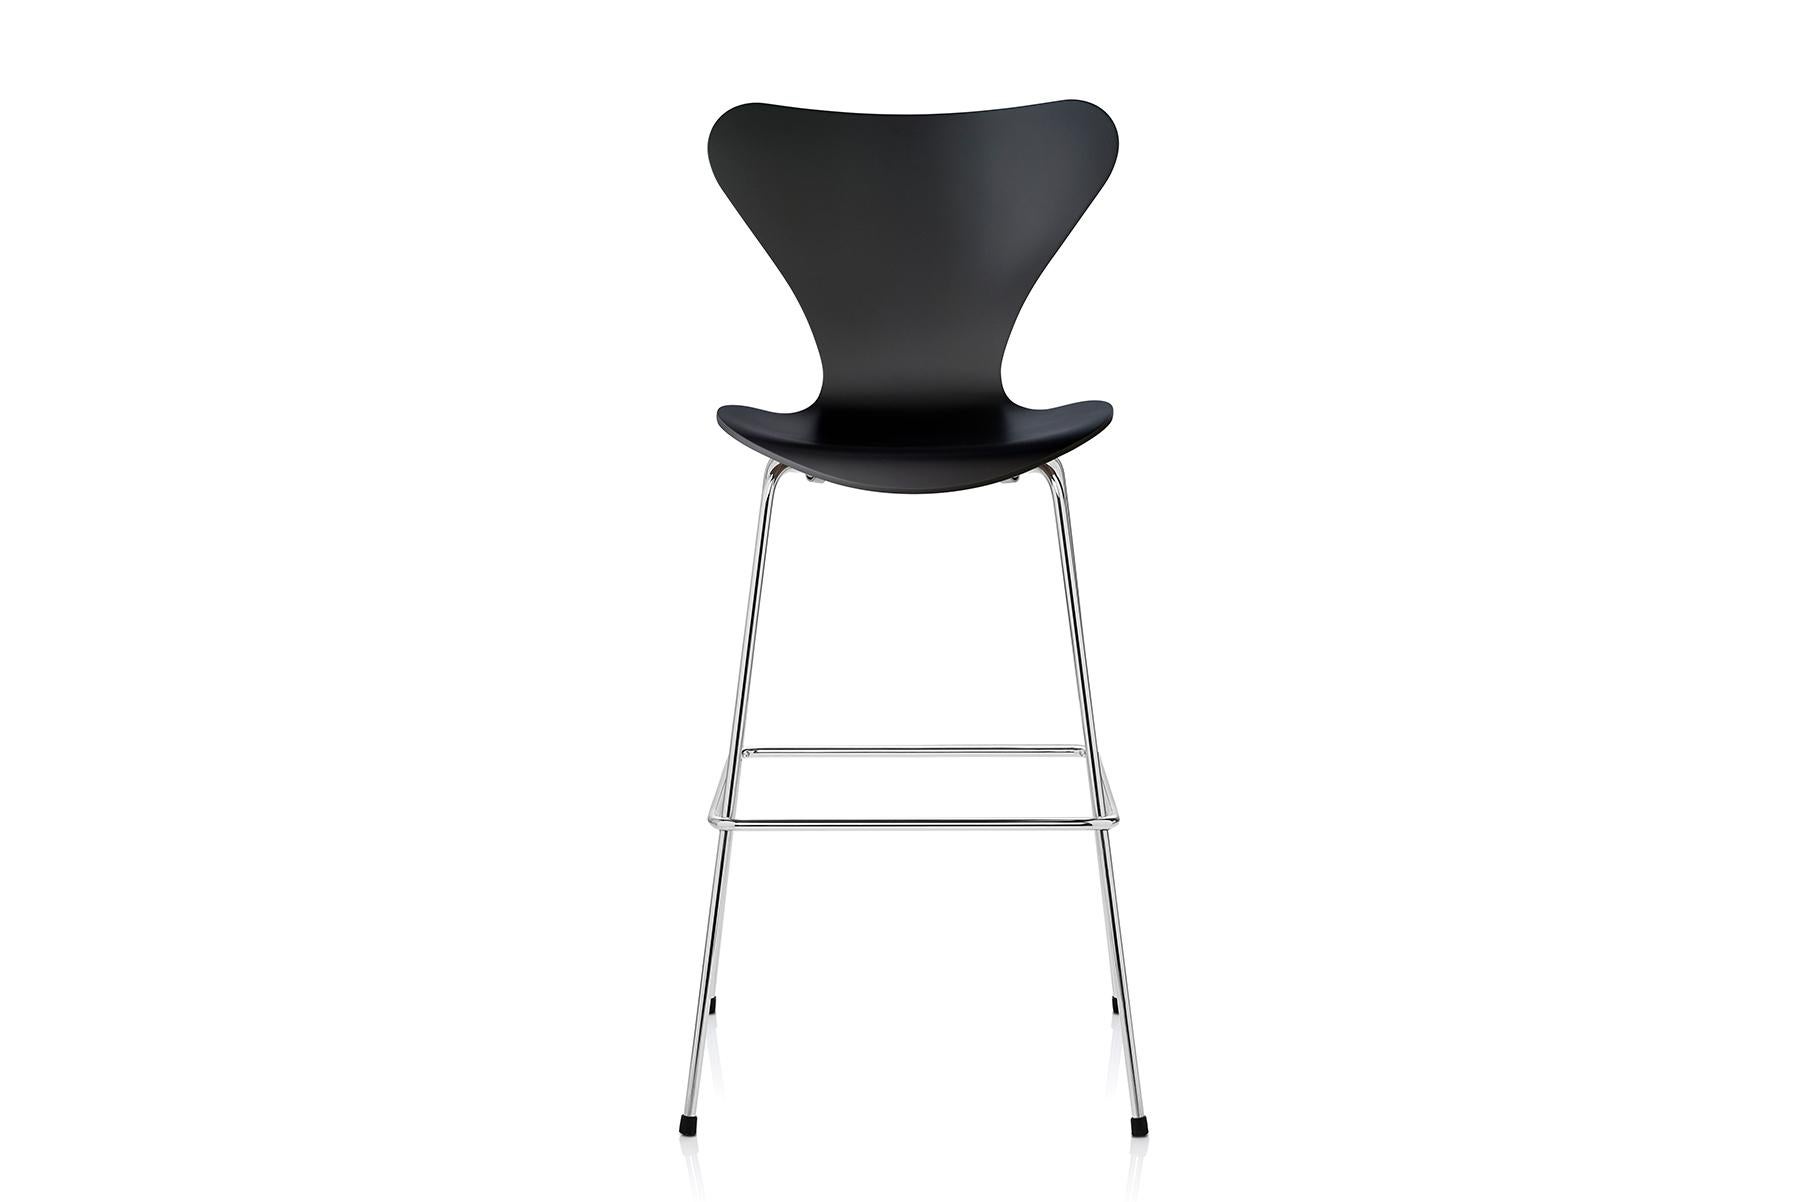 American Arne Jacobsen Model 3197 Lacquere For Sale